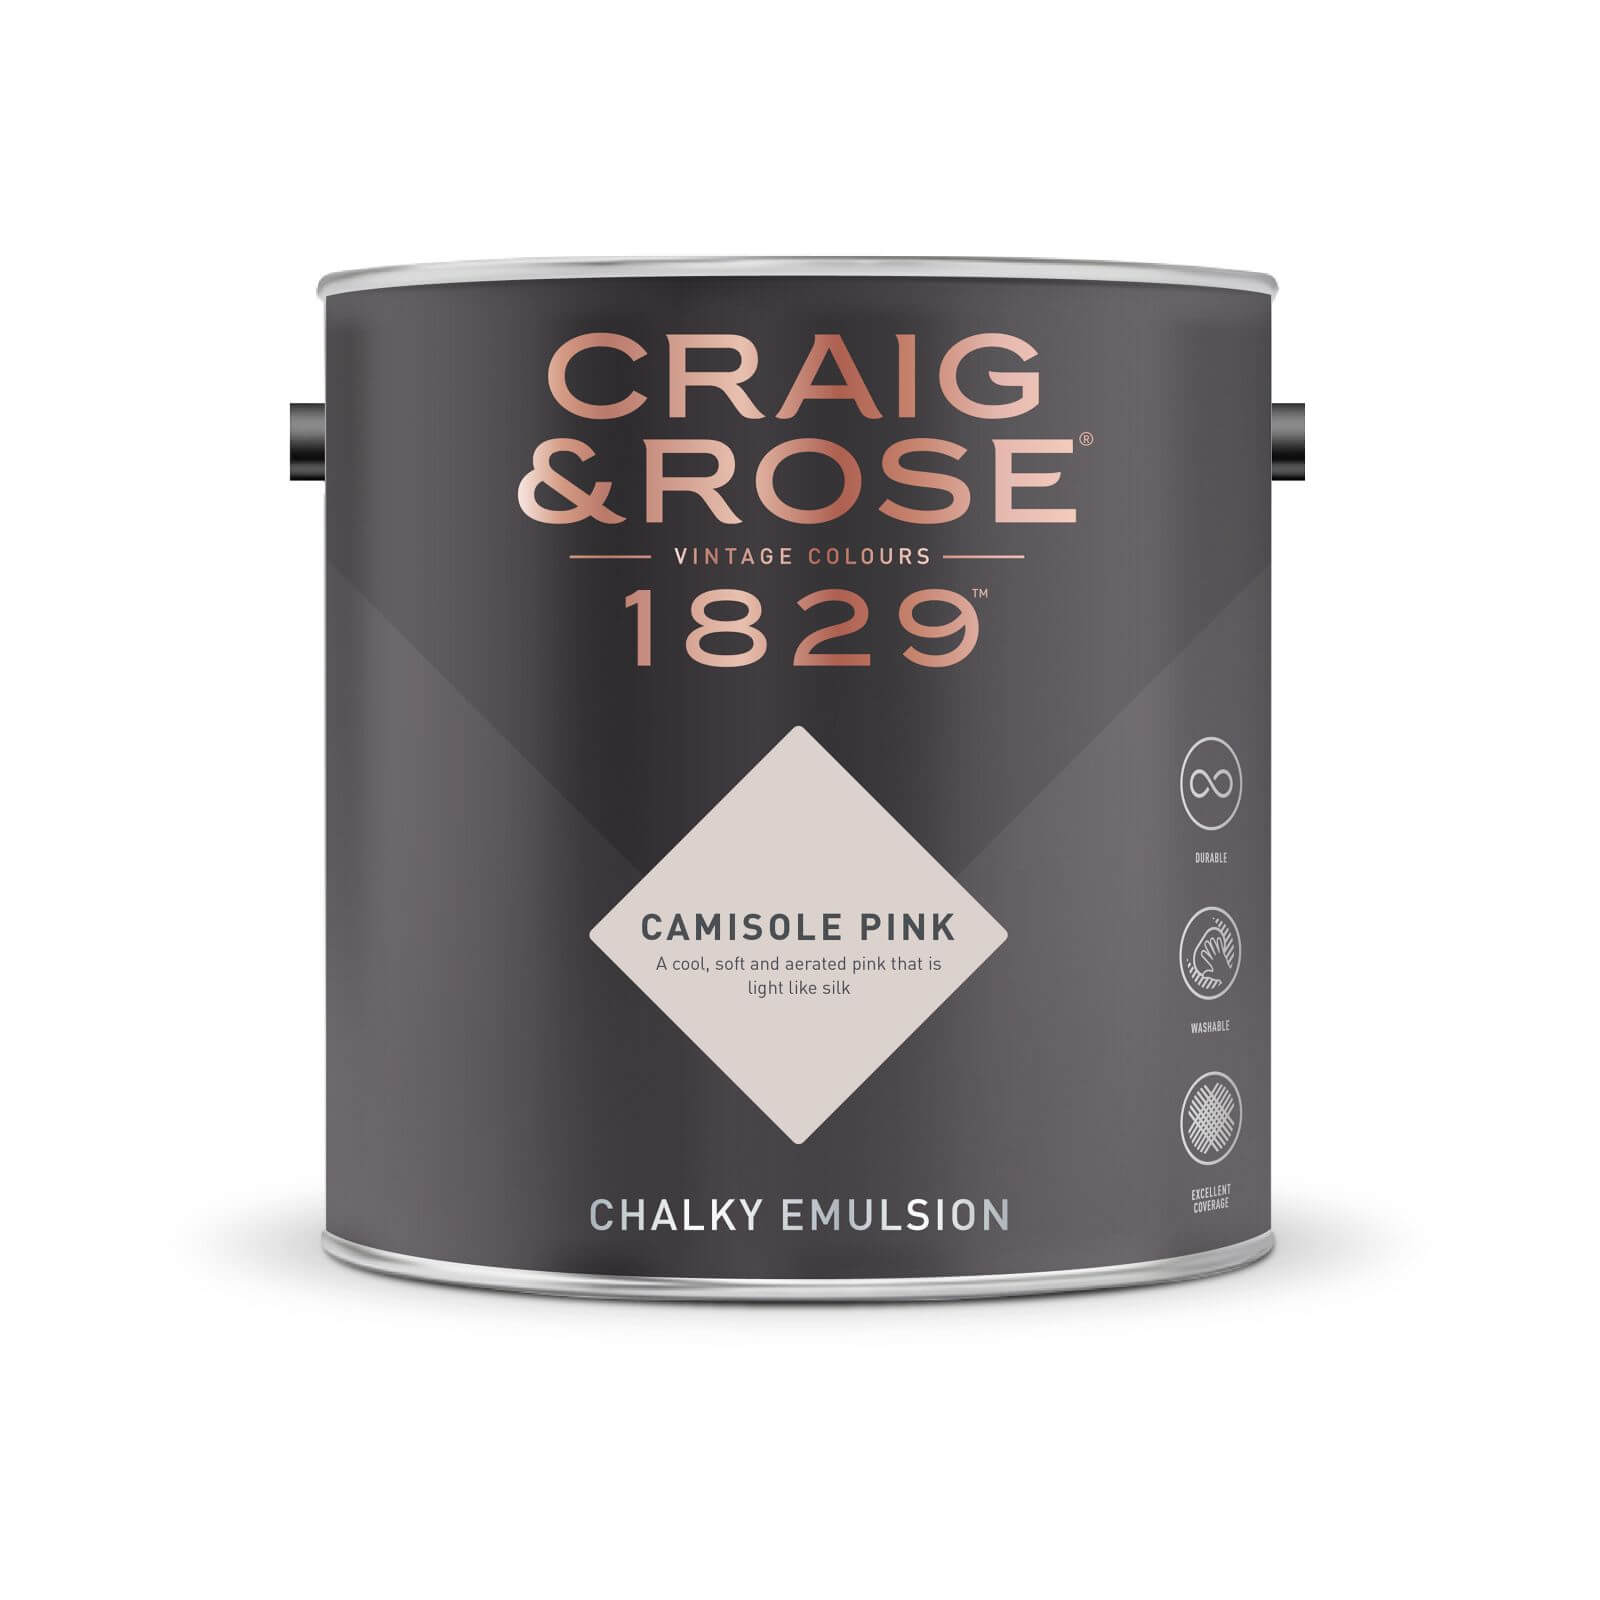 Craig & Rose 1829 Chalky Emulsion Paint Camisole Pink - 5L